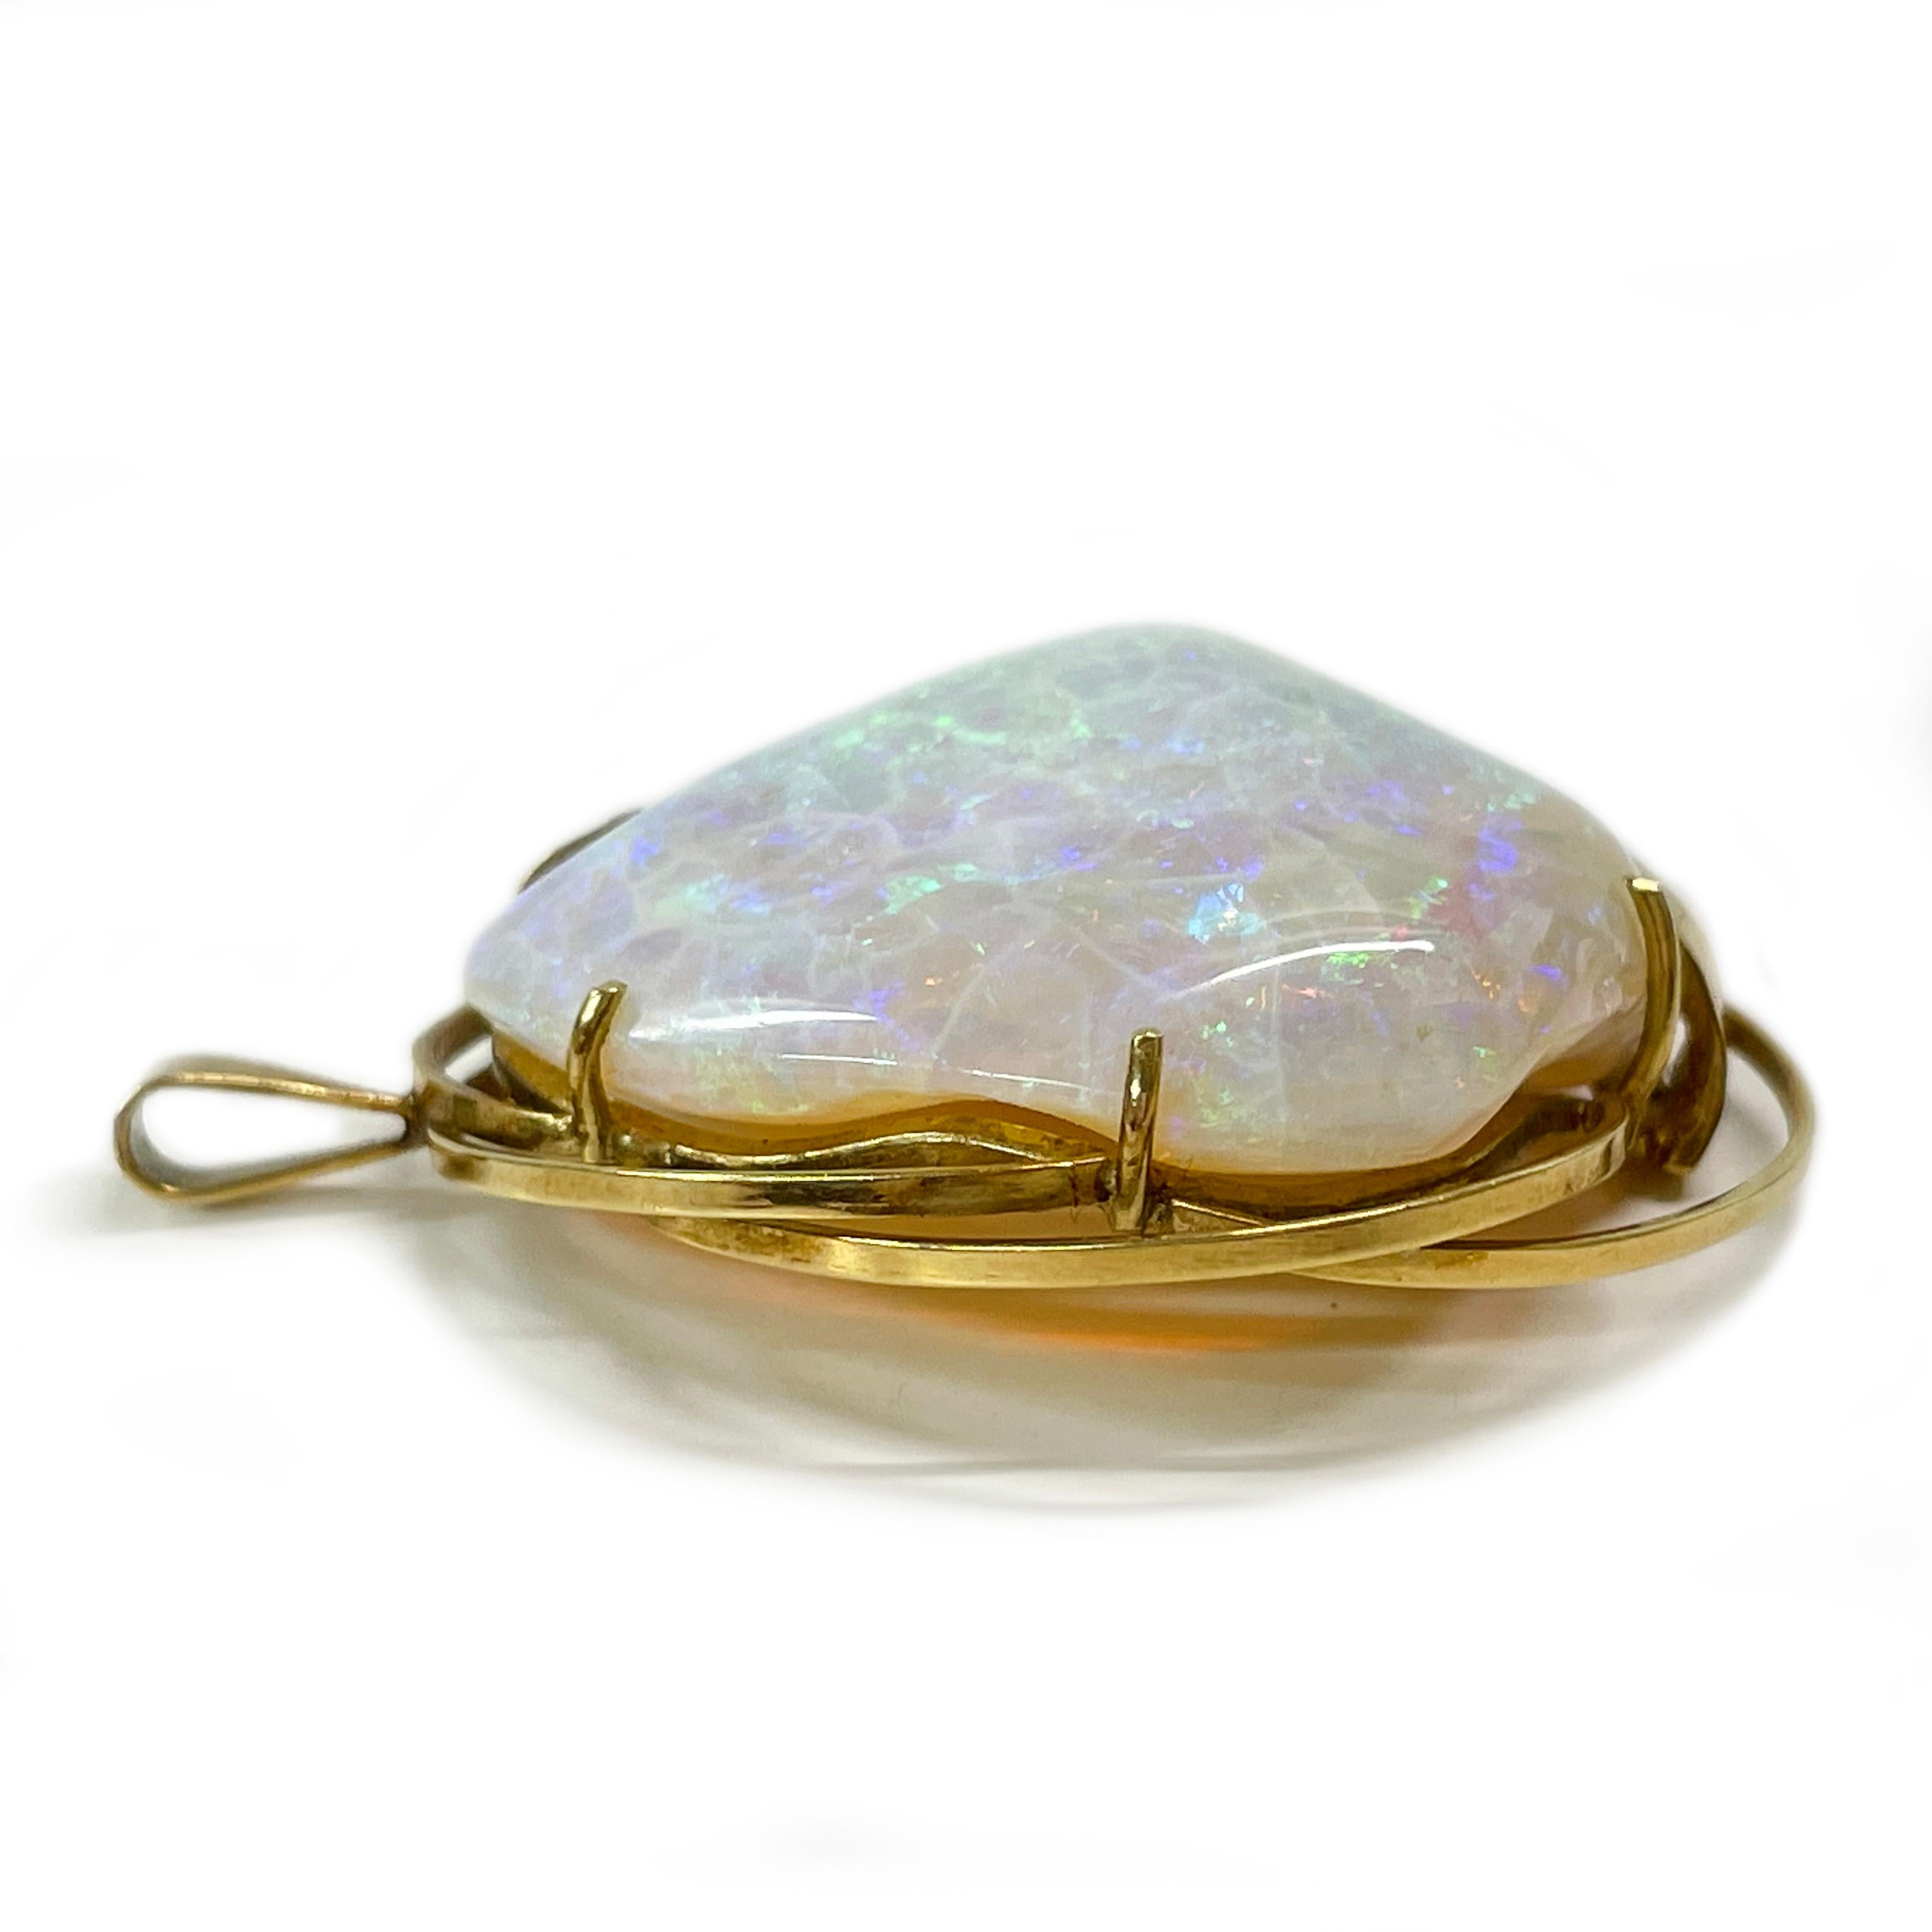 Tested 18 Karat Yellow Gold Opal Diamond Pendant. The pendant features a 32.43 x 28 x 61mm (46ct) opal prong-set on a handmade open bezel with multiple wire loops. There is a single gold strip on the front of the bezel that follows the form of the